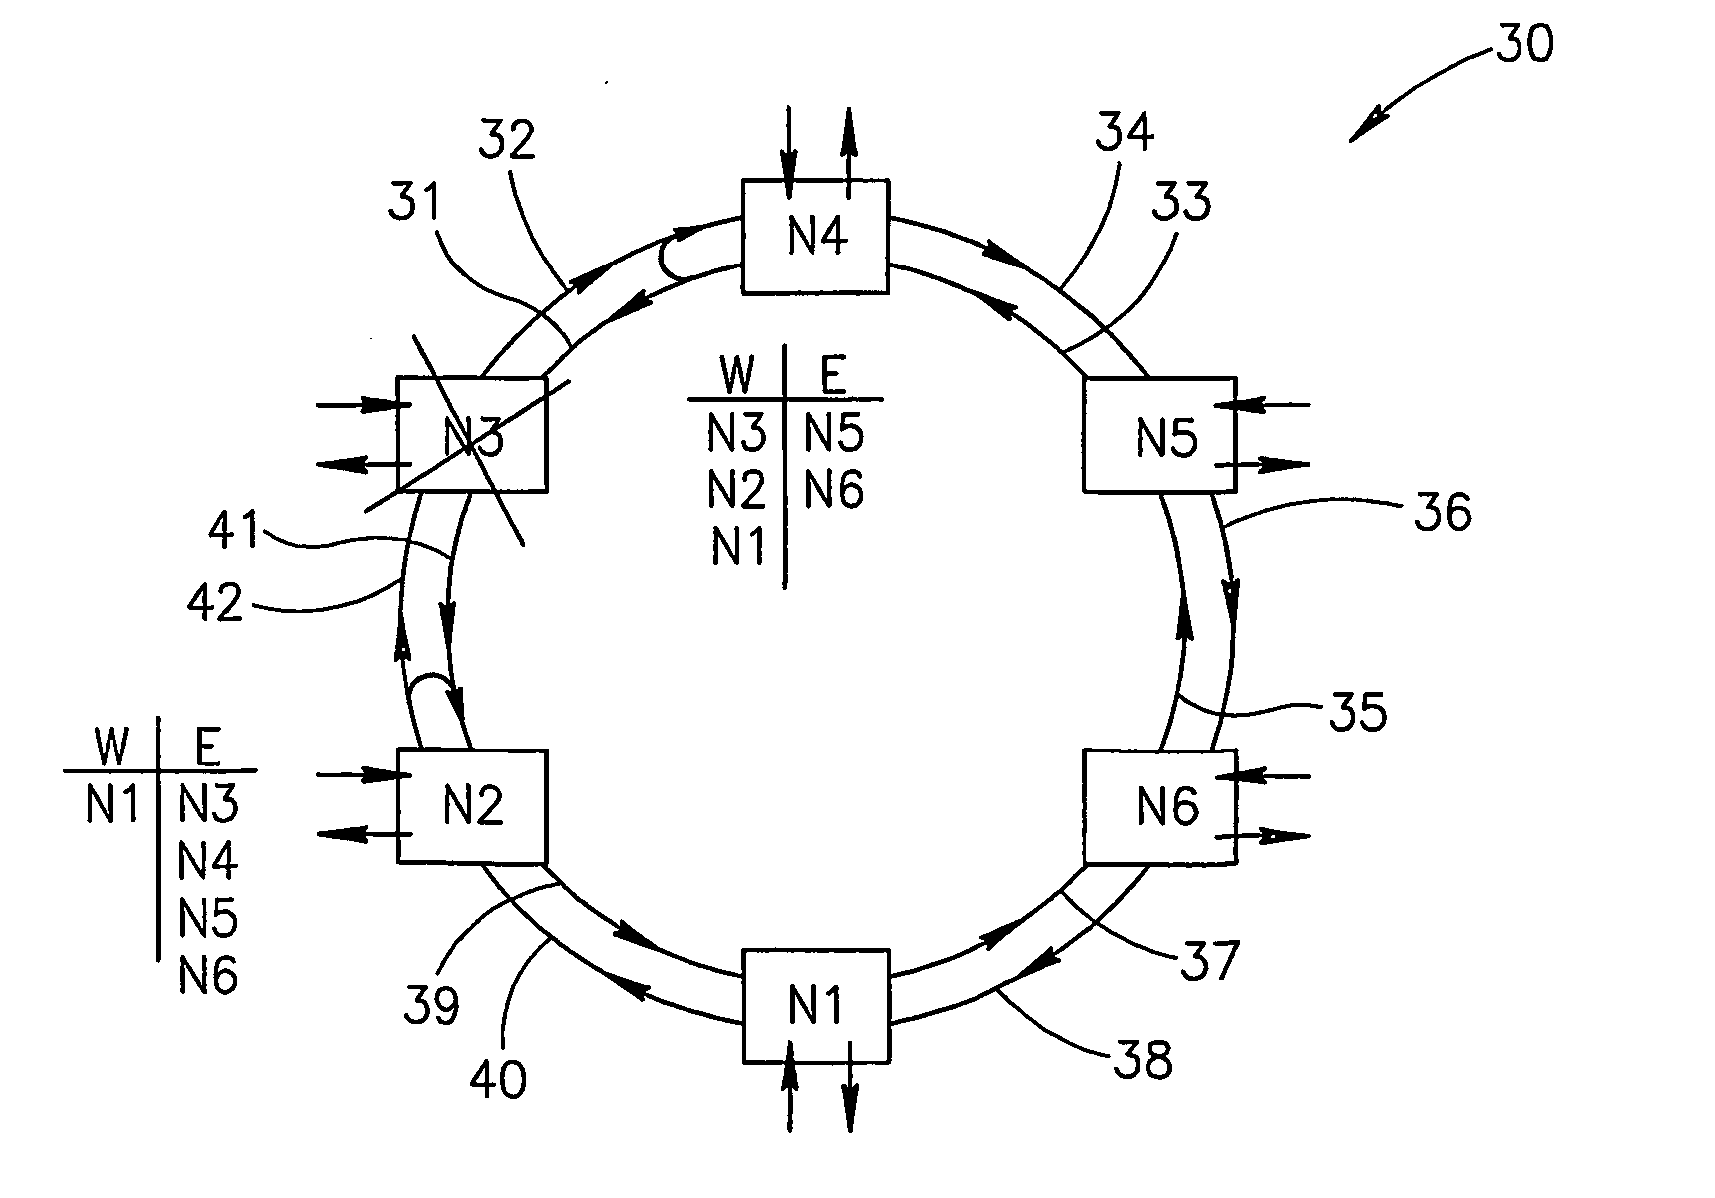 Method for protection of ethernet traffic in optical ring networks